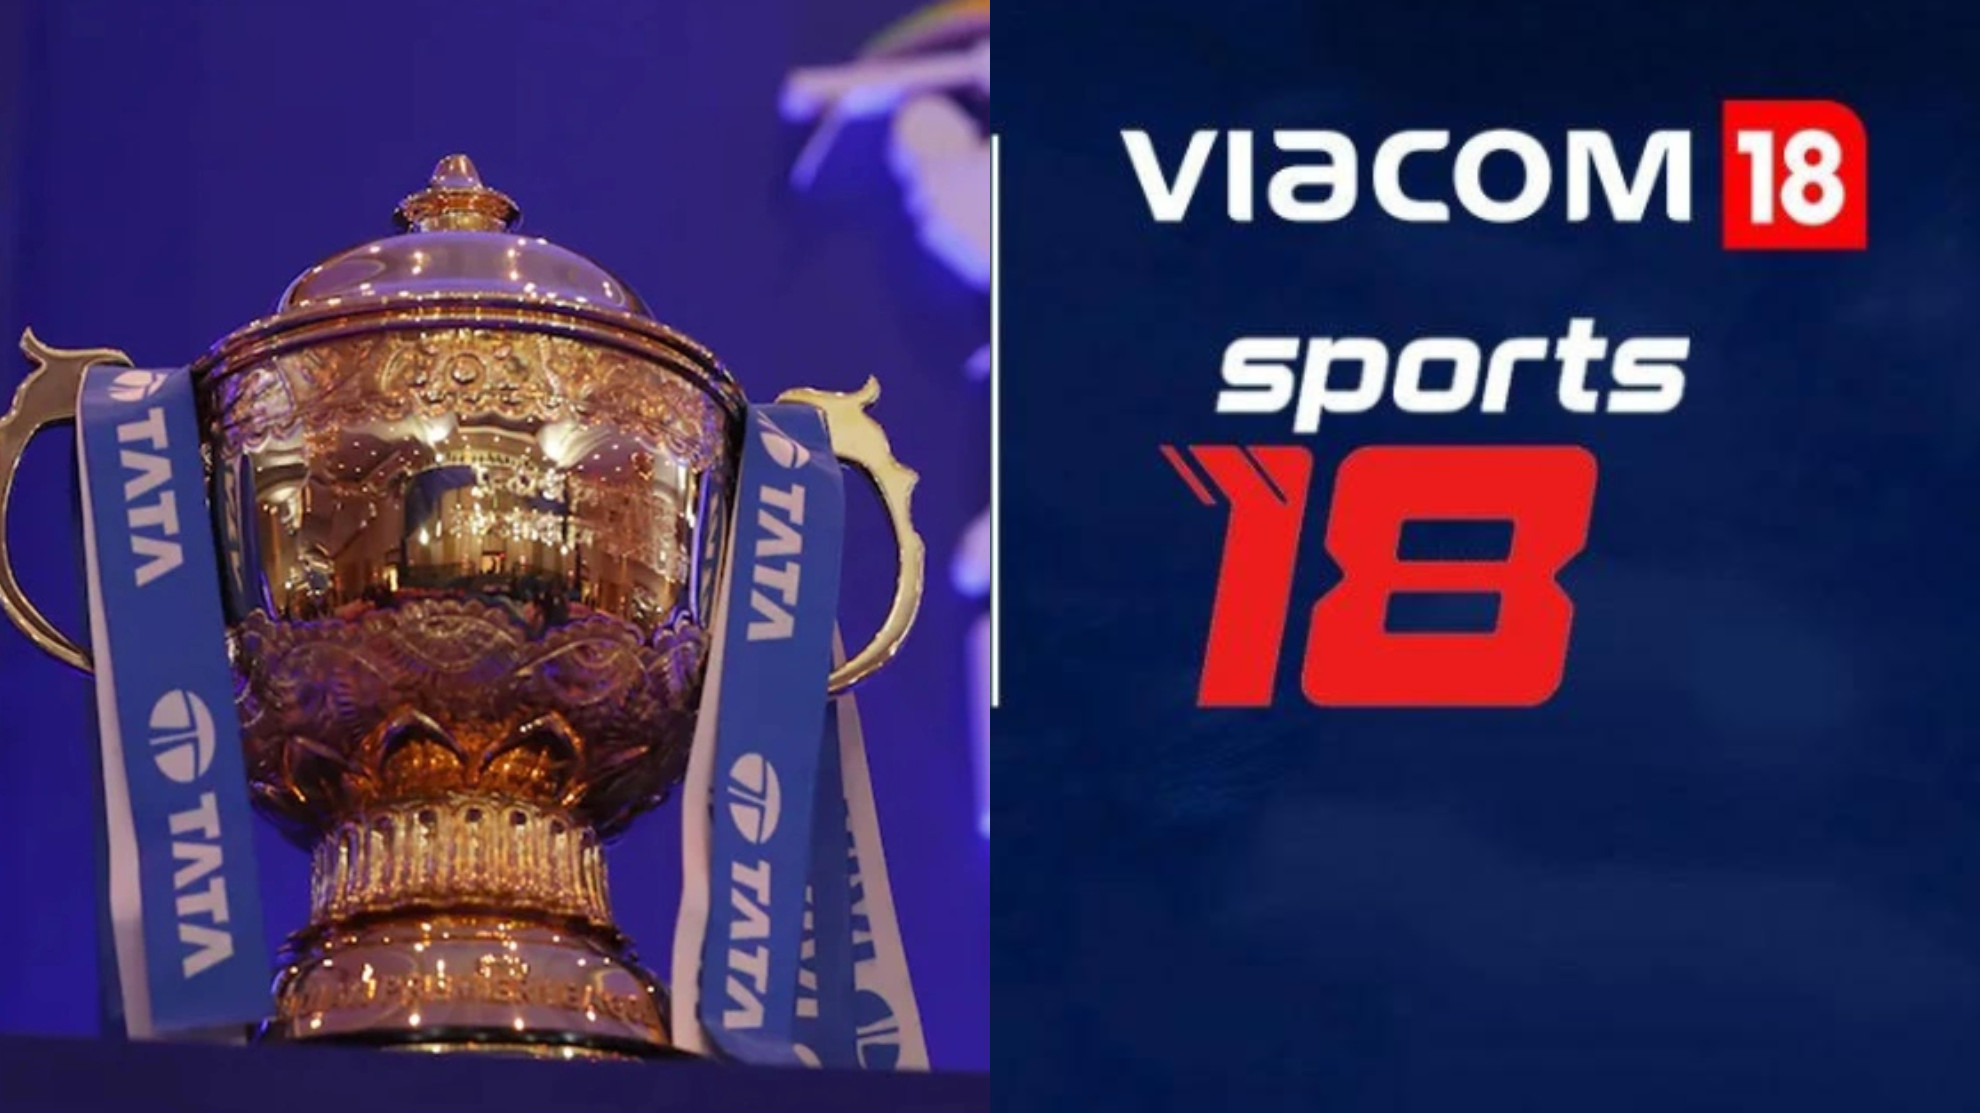 IPL 2023 OTT telecast on Jio-Viacom18 to have multiple streams; personalized camera angles for viewers